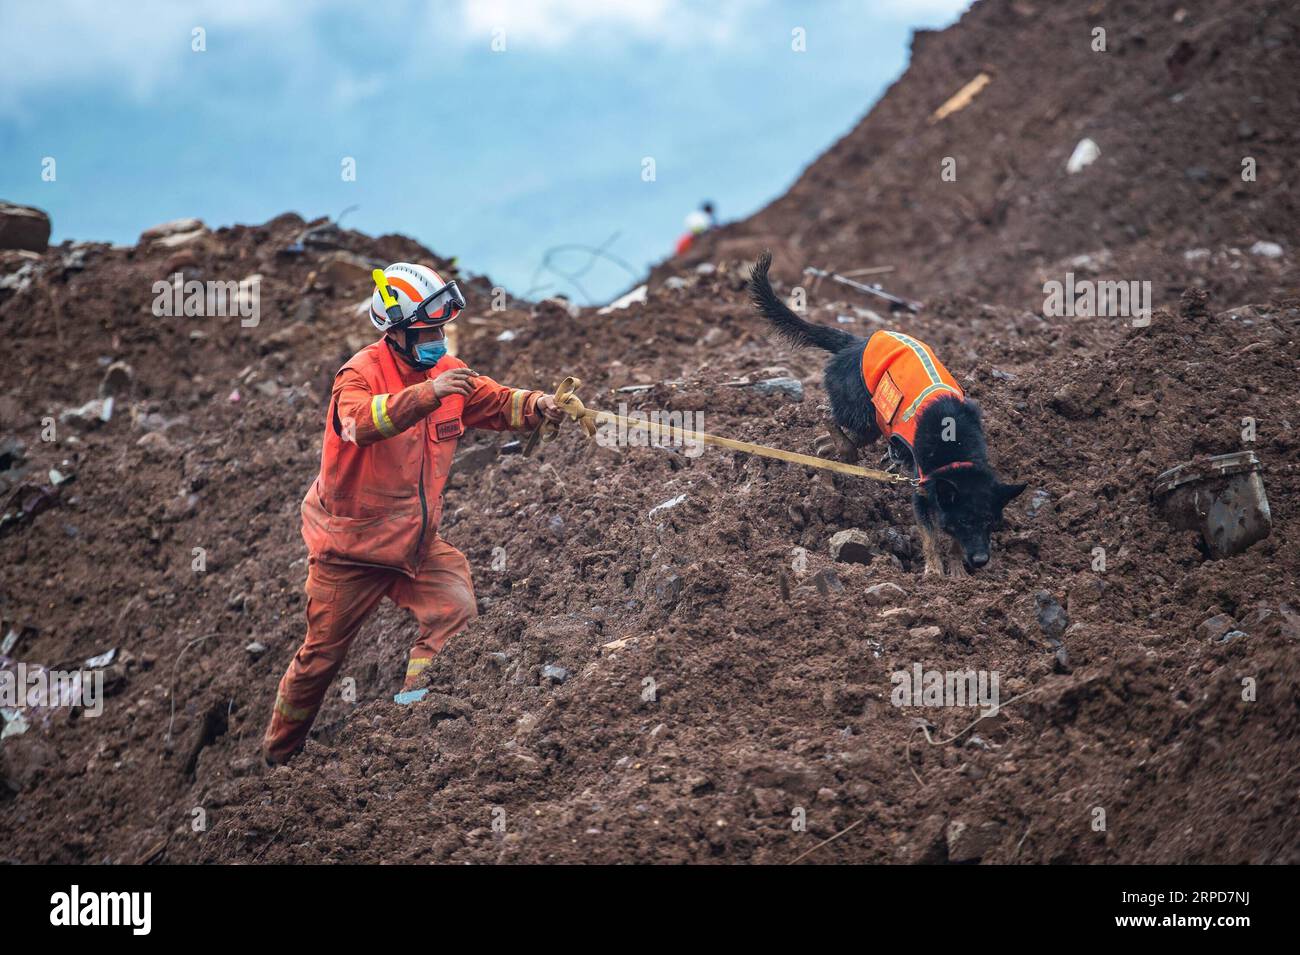 (190726) -- BEIJING, July 26, 2019 -- A rescuer works at the landslide site in Shuicheng County of Liupanshui City, southwest China s Guizhou Province, July 25, 2019. The death toll has risen to 15 after a landslide hit southwest China s Guizhou Province, local authorities said Thursday. ) XINHUA PHOTOS OF THE DAY TaoxLiang PUBLICATIONxNOTxINxCHN Stock Photo